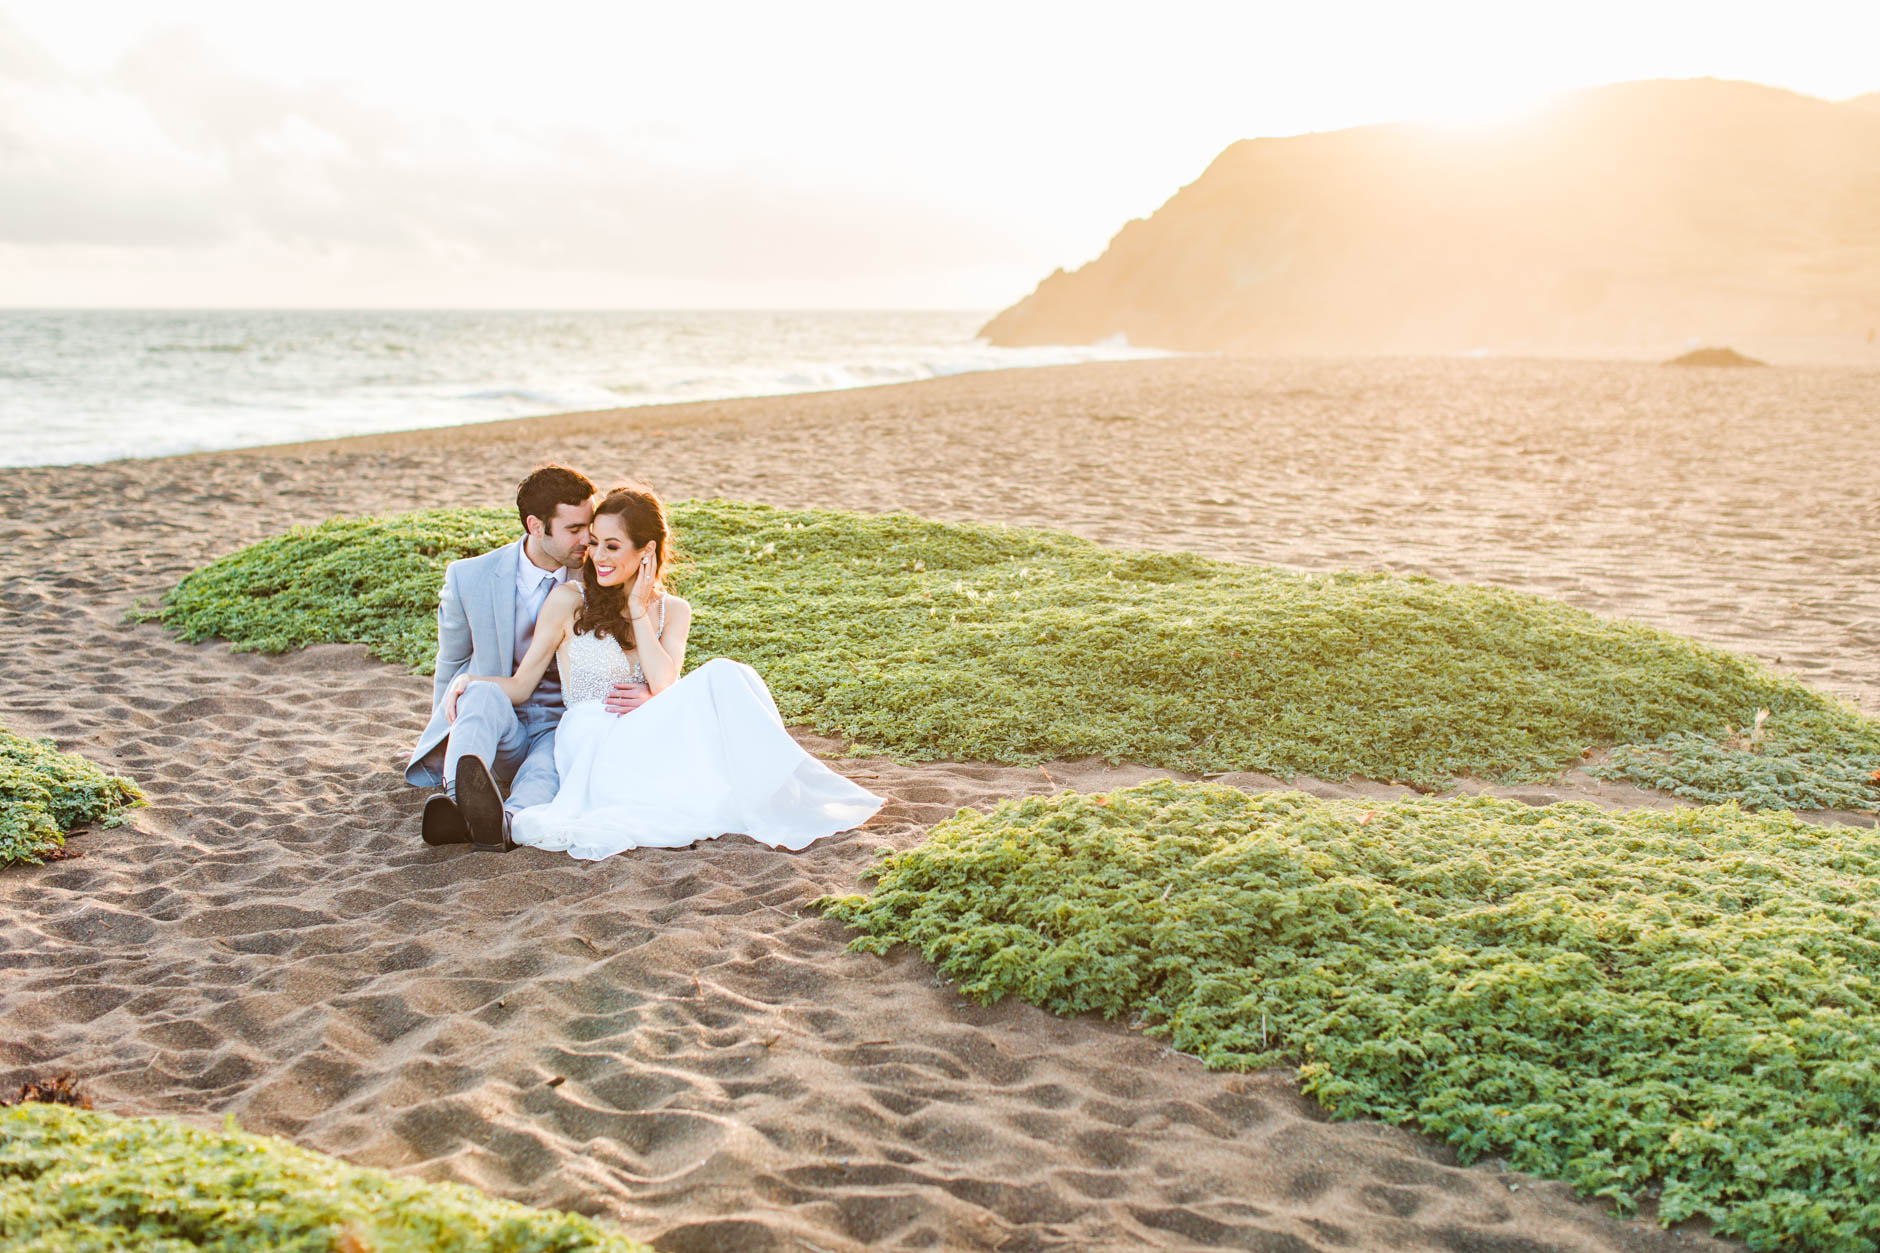 Bride and groom sitting on beach at sunset during windswept elopement